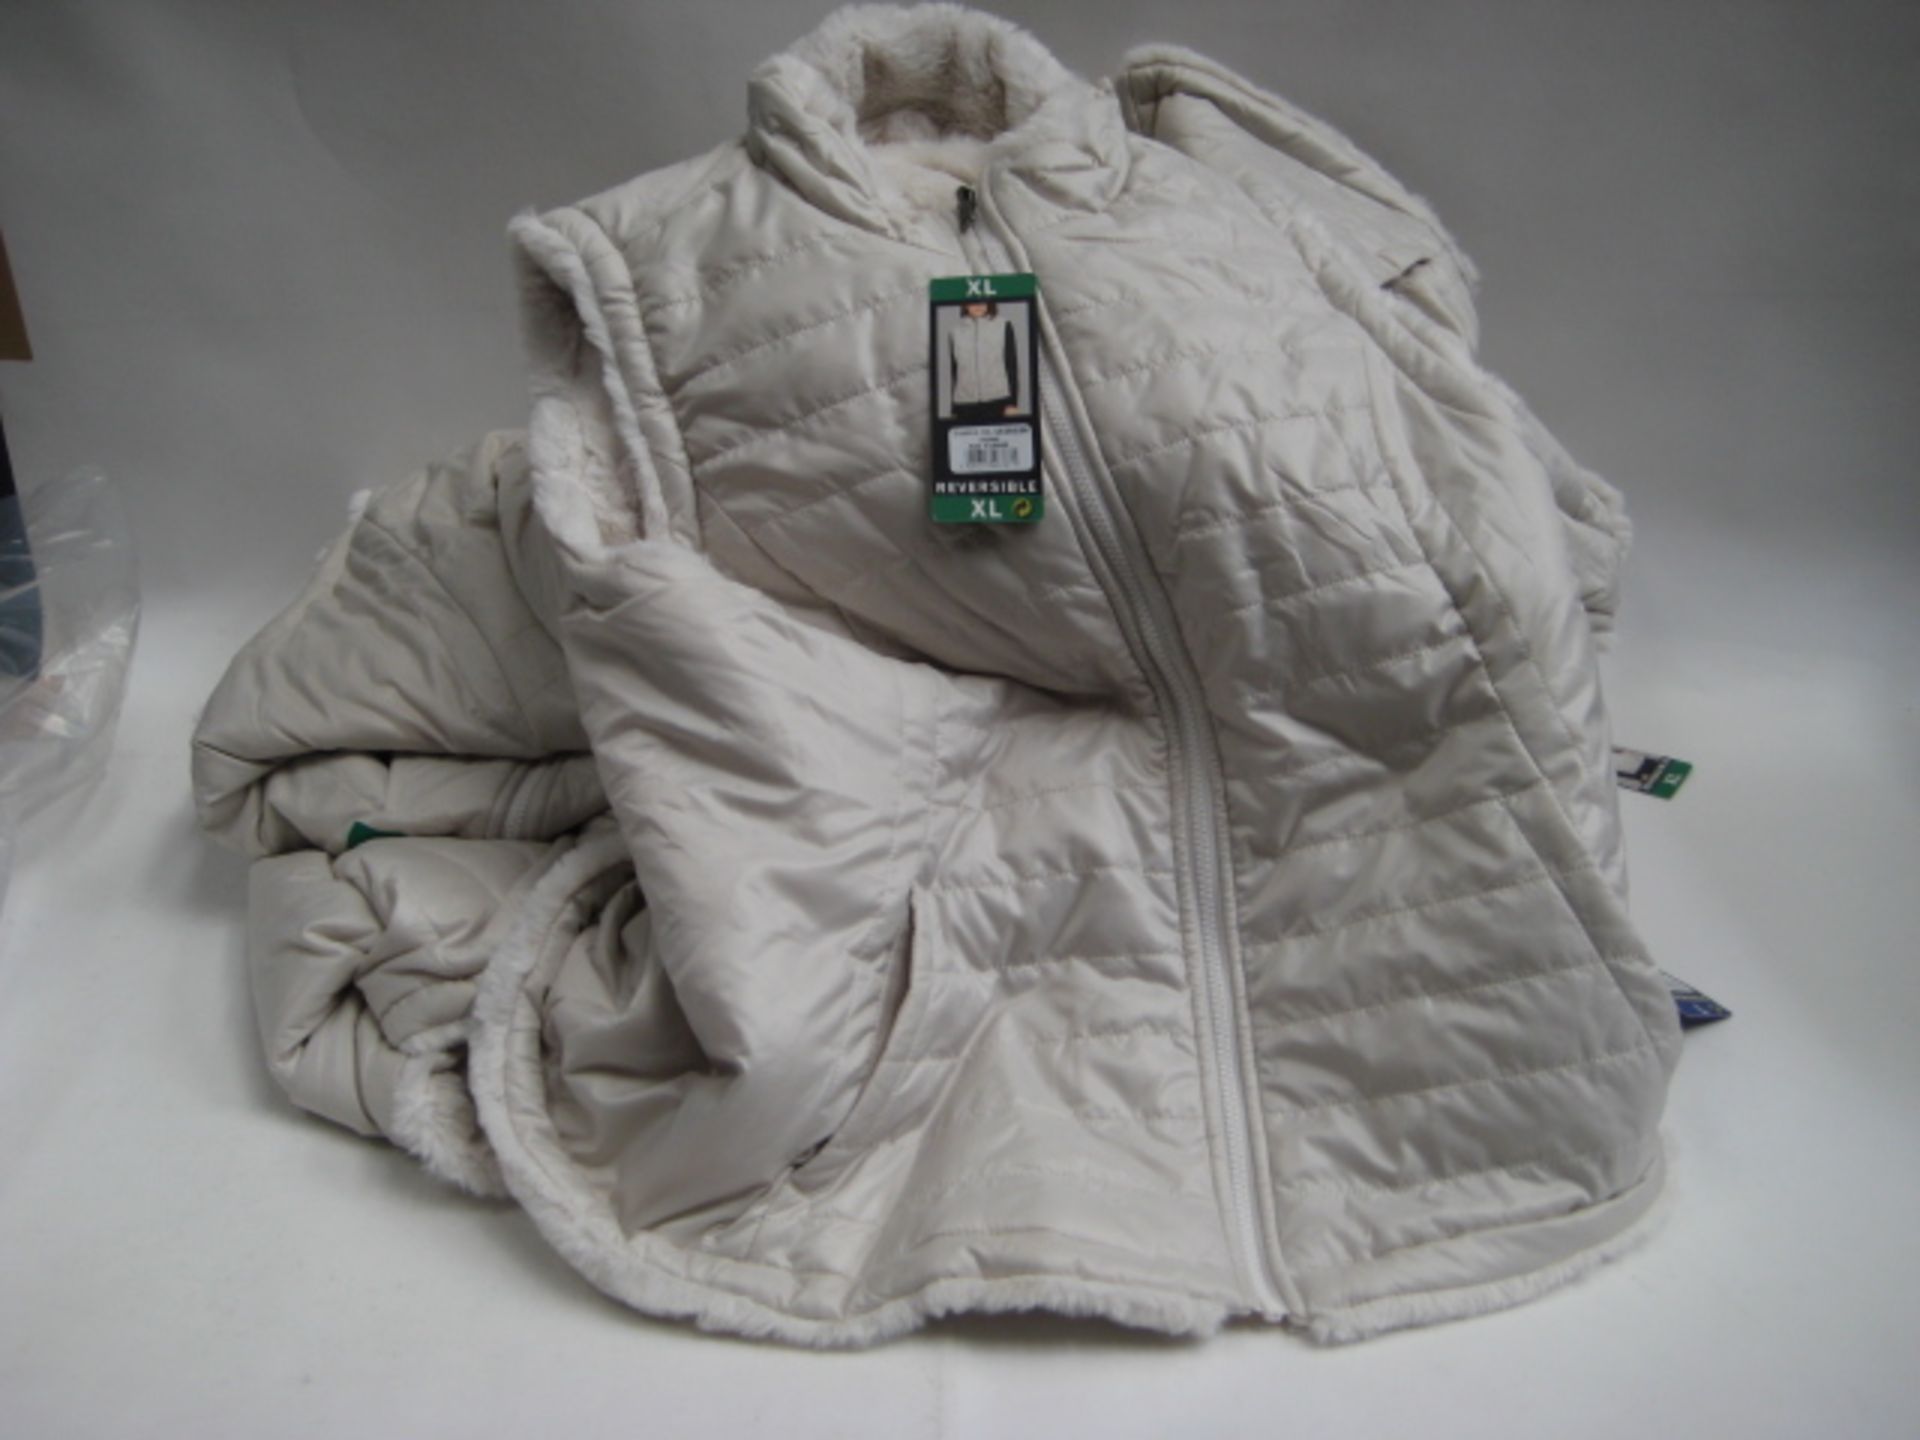 Bag containing 7 ladies reversible gilets by Nicole Miller in ivory, sizes mostly XL and one L